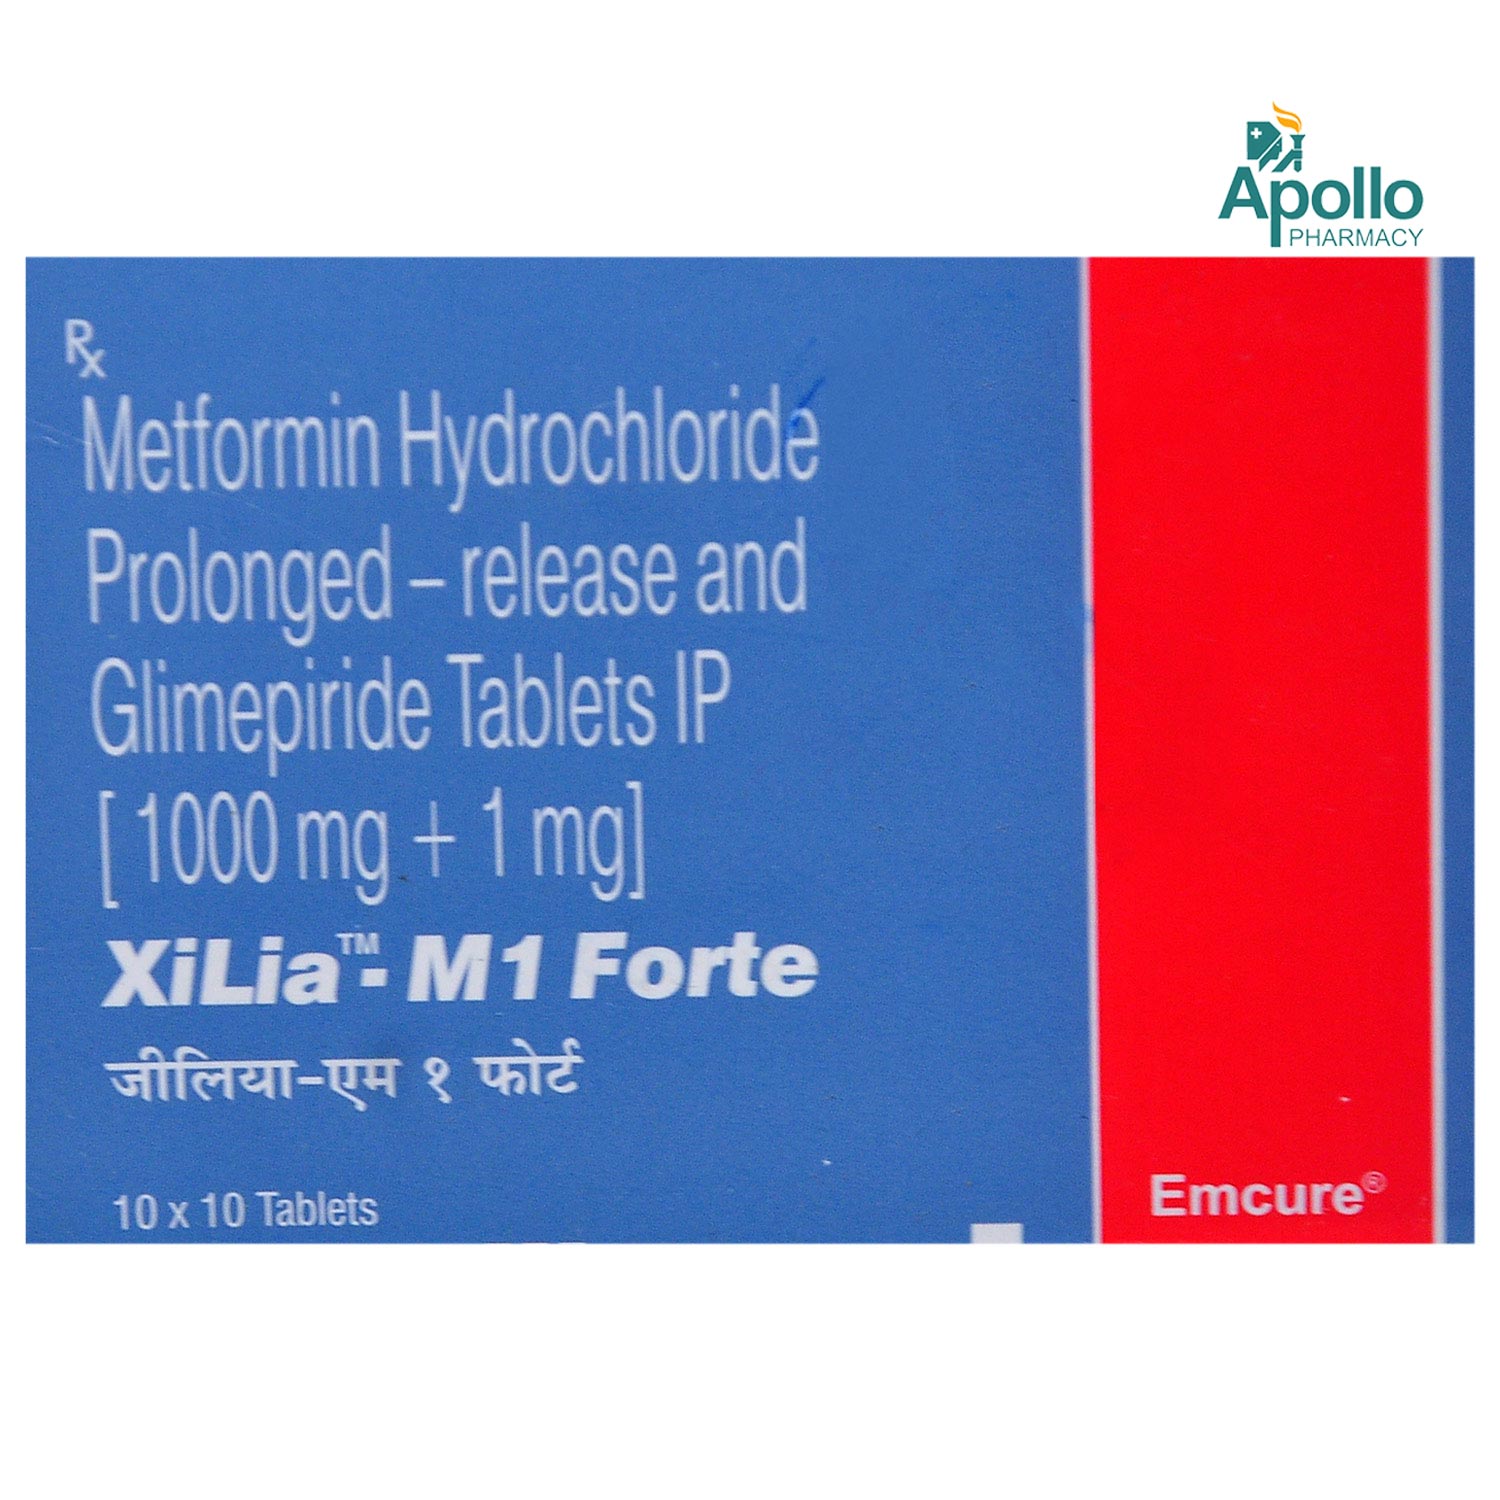 Xilia-M 1 Forte Tablet 10's, Pack of 10 TABLETS